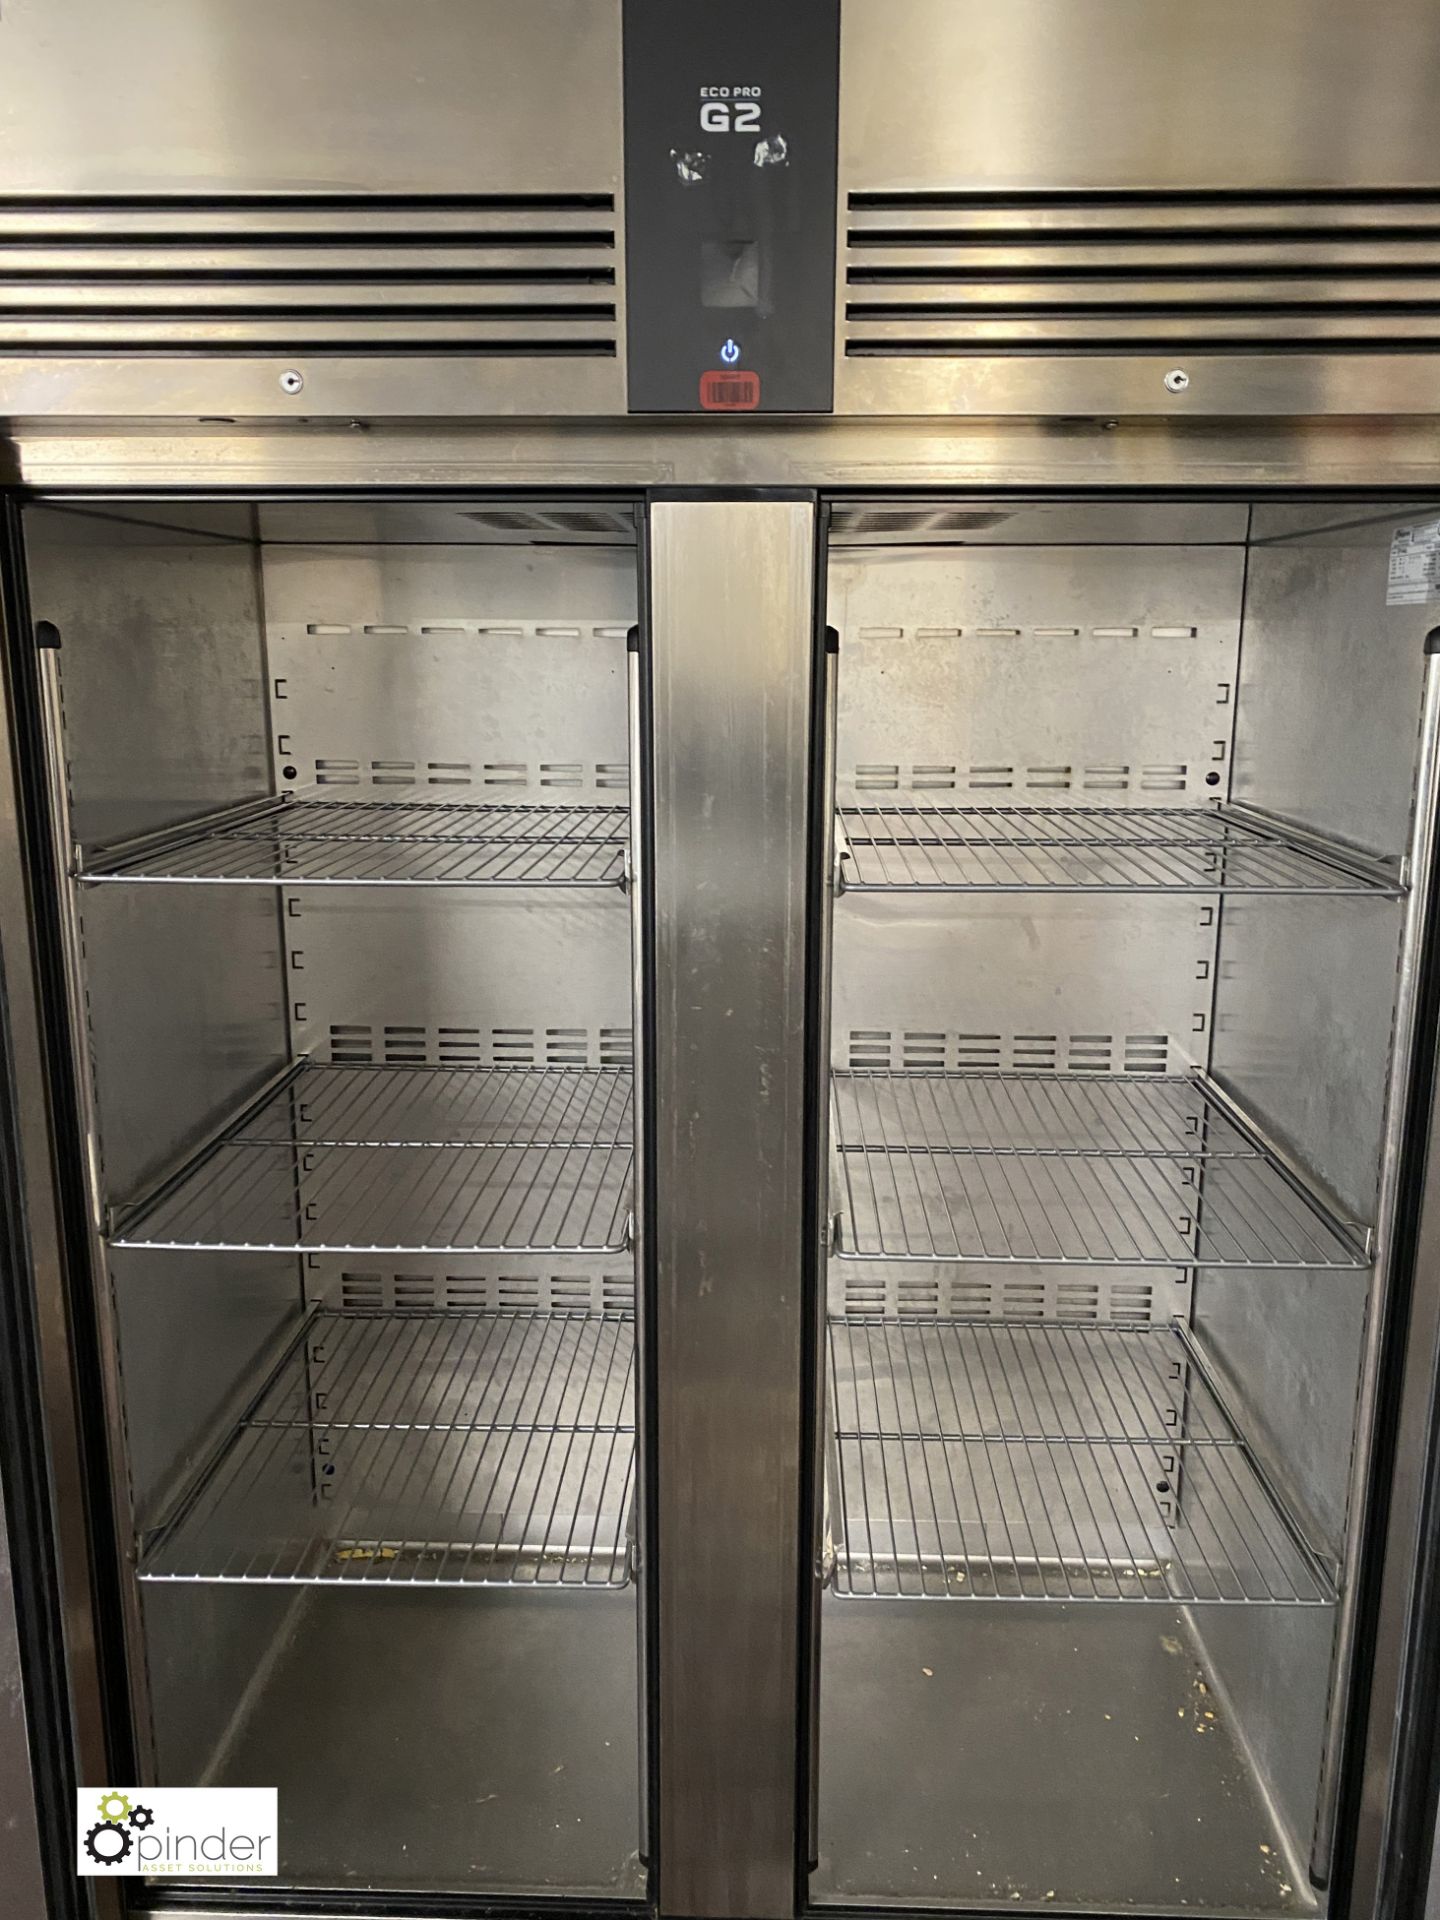 Foster EP1440L stainless steel double door mobile Freezer, 240volts - Image 3 of 4